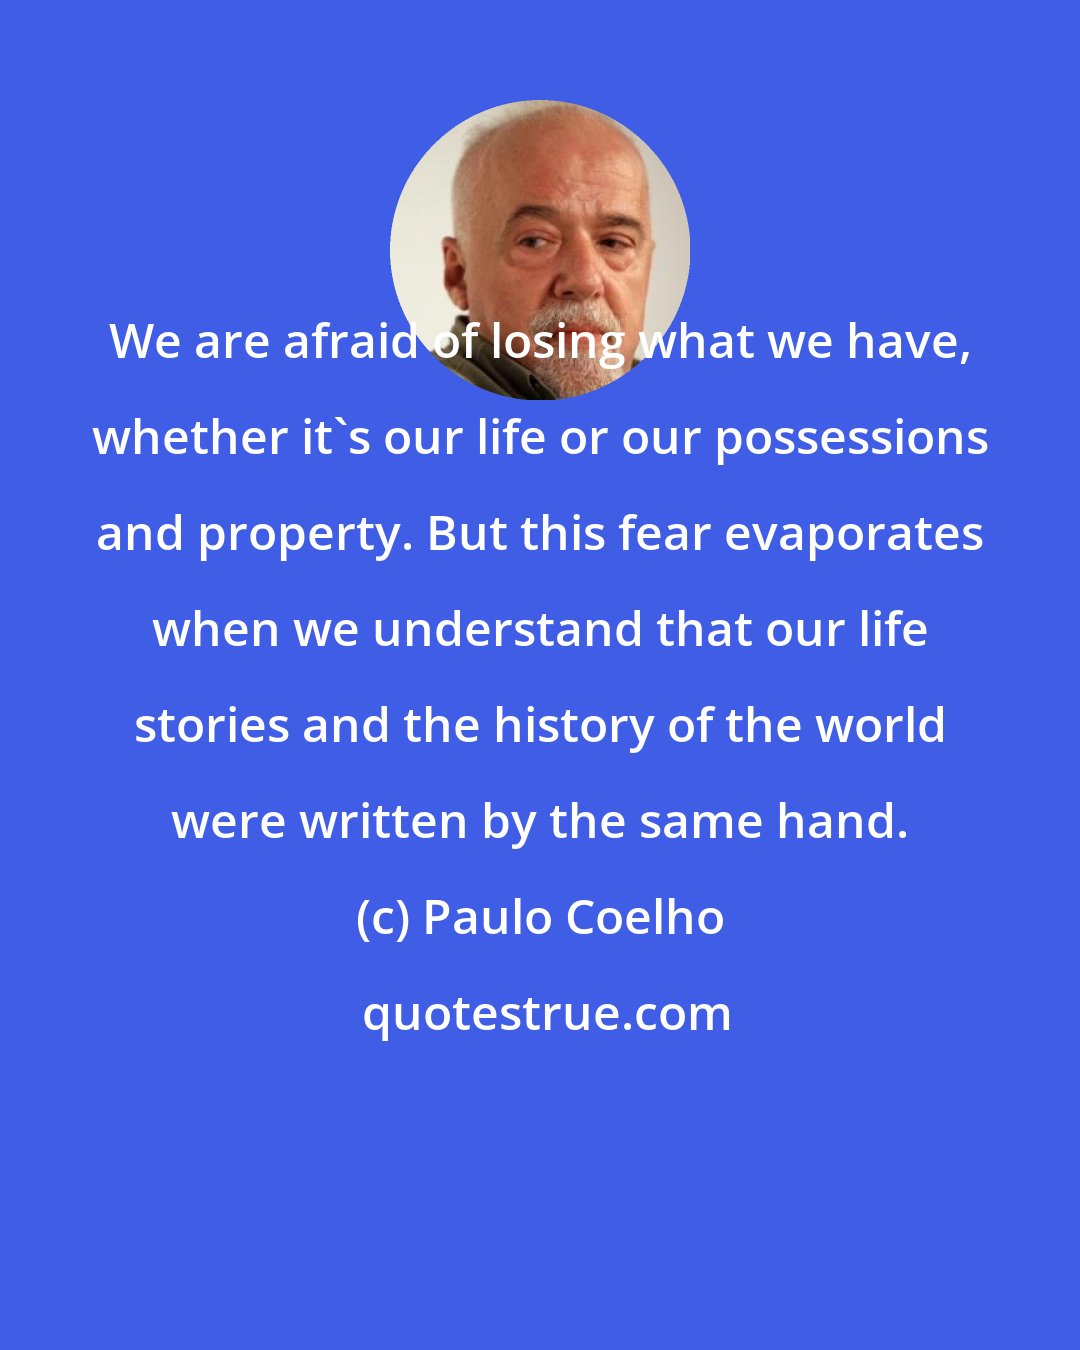 Paulo Coelho: We are afraid of losing what we have, whether it's our life or our possessions and property. But this fear evaporates when we understand that our life stories and the history of the world were written by the same hand.